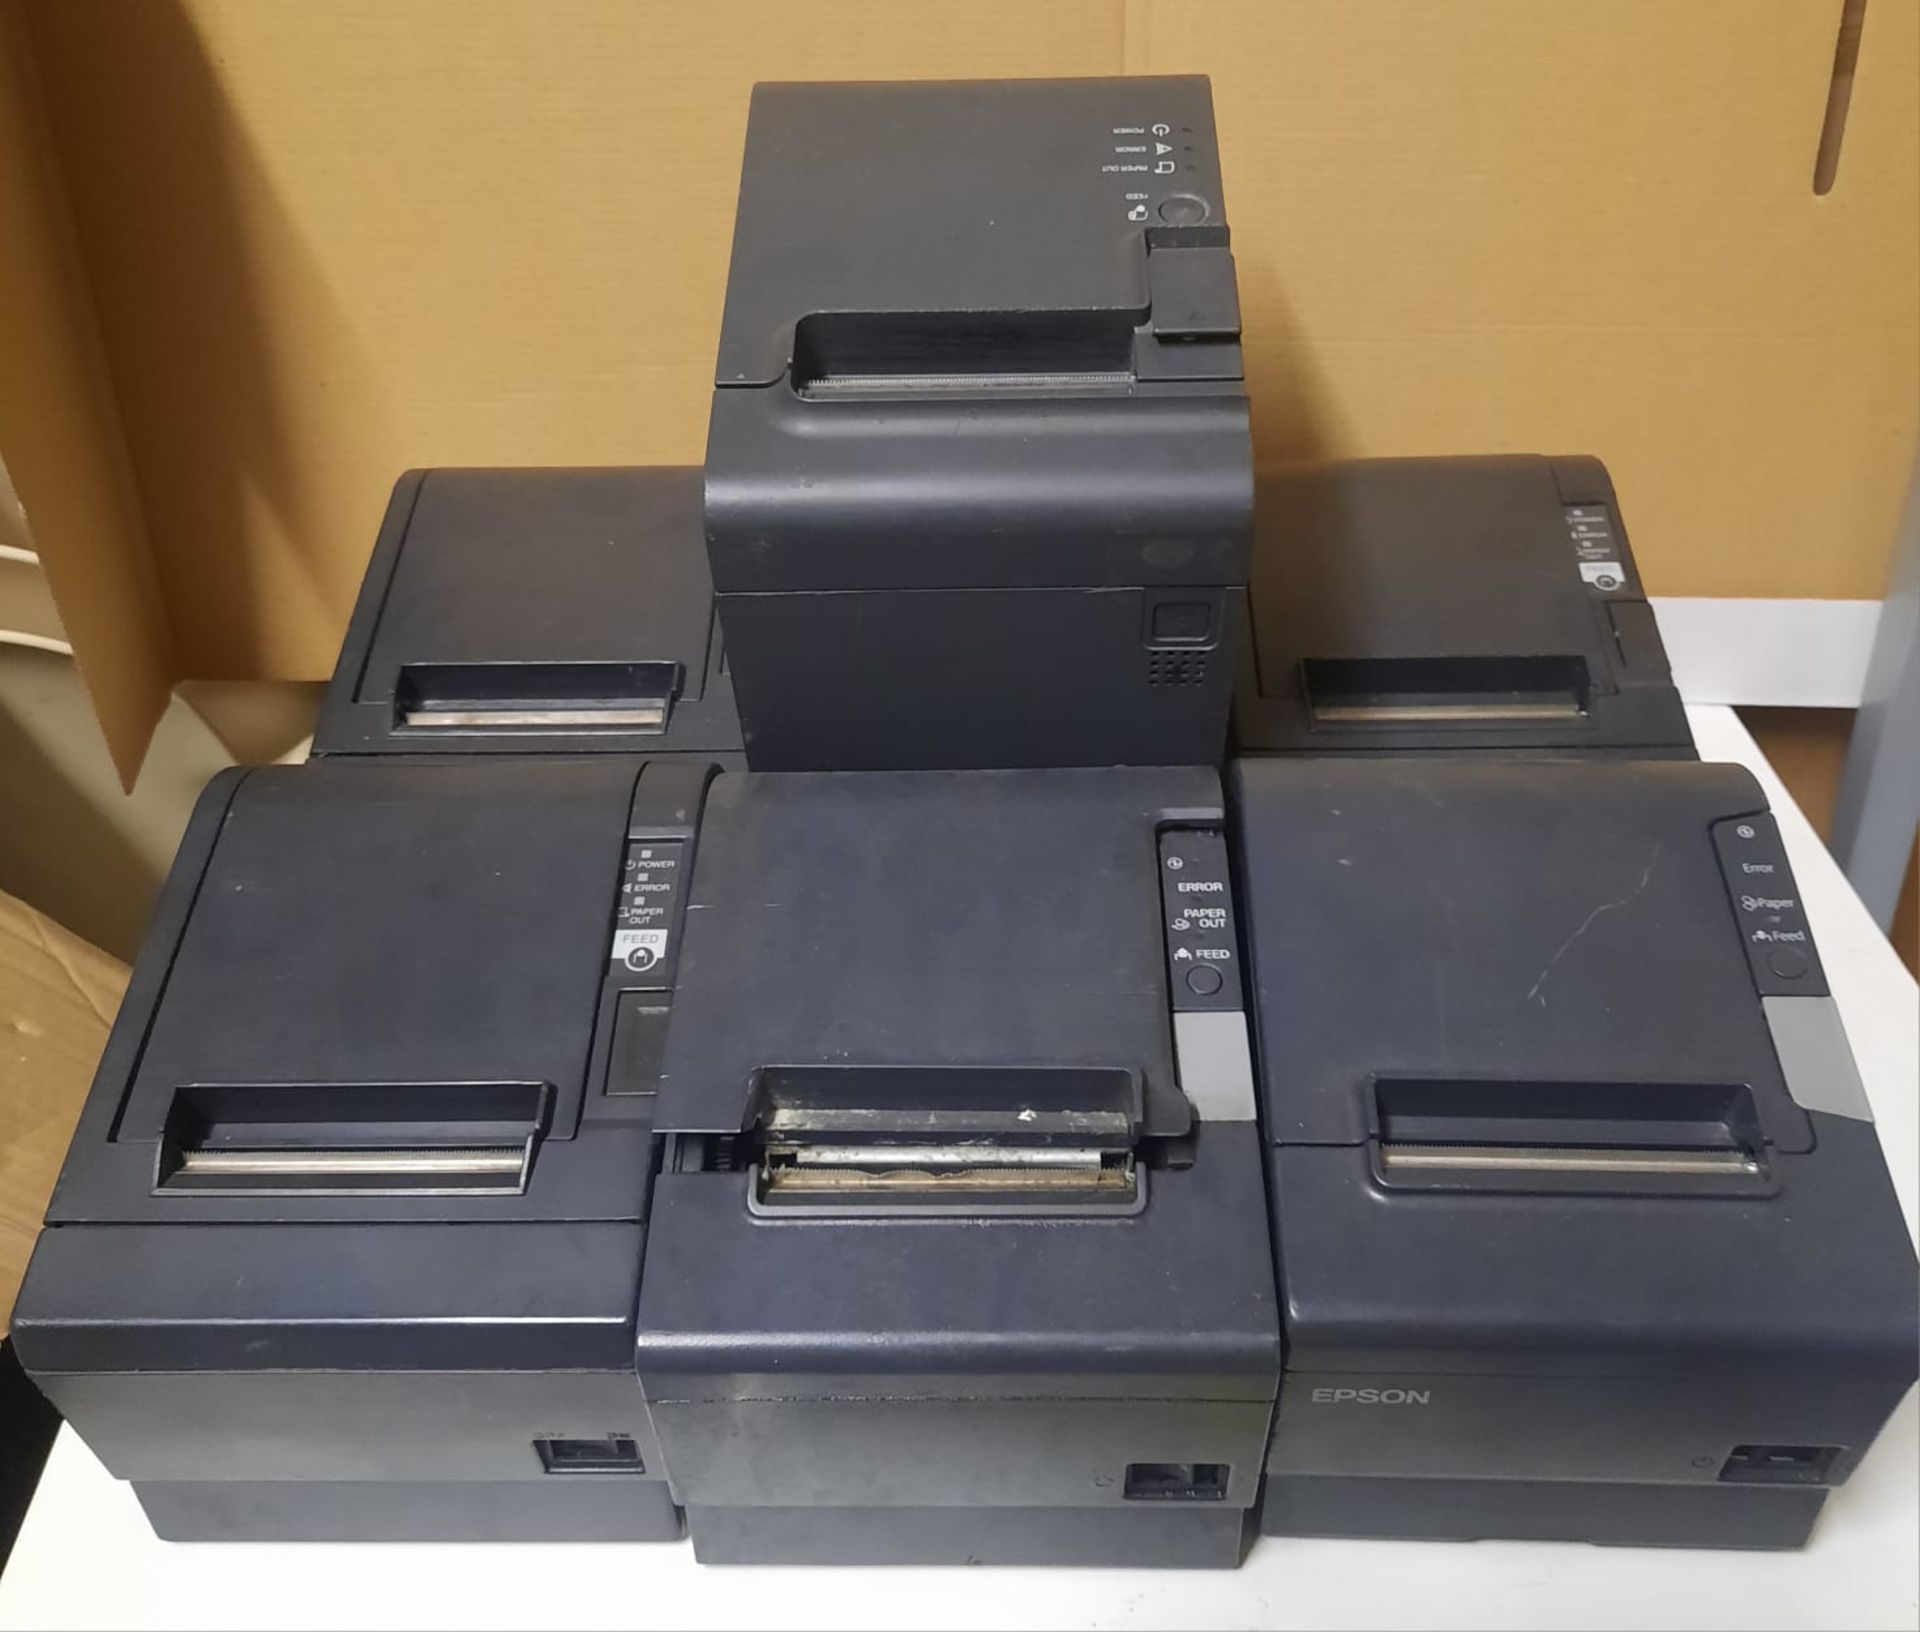 X 7 VARIOUS RECEIPT PRINTERS INCLUIDING EPSON FROM A WORKING ENVIROMENT, BUT NOT TESTED BY US -